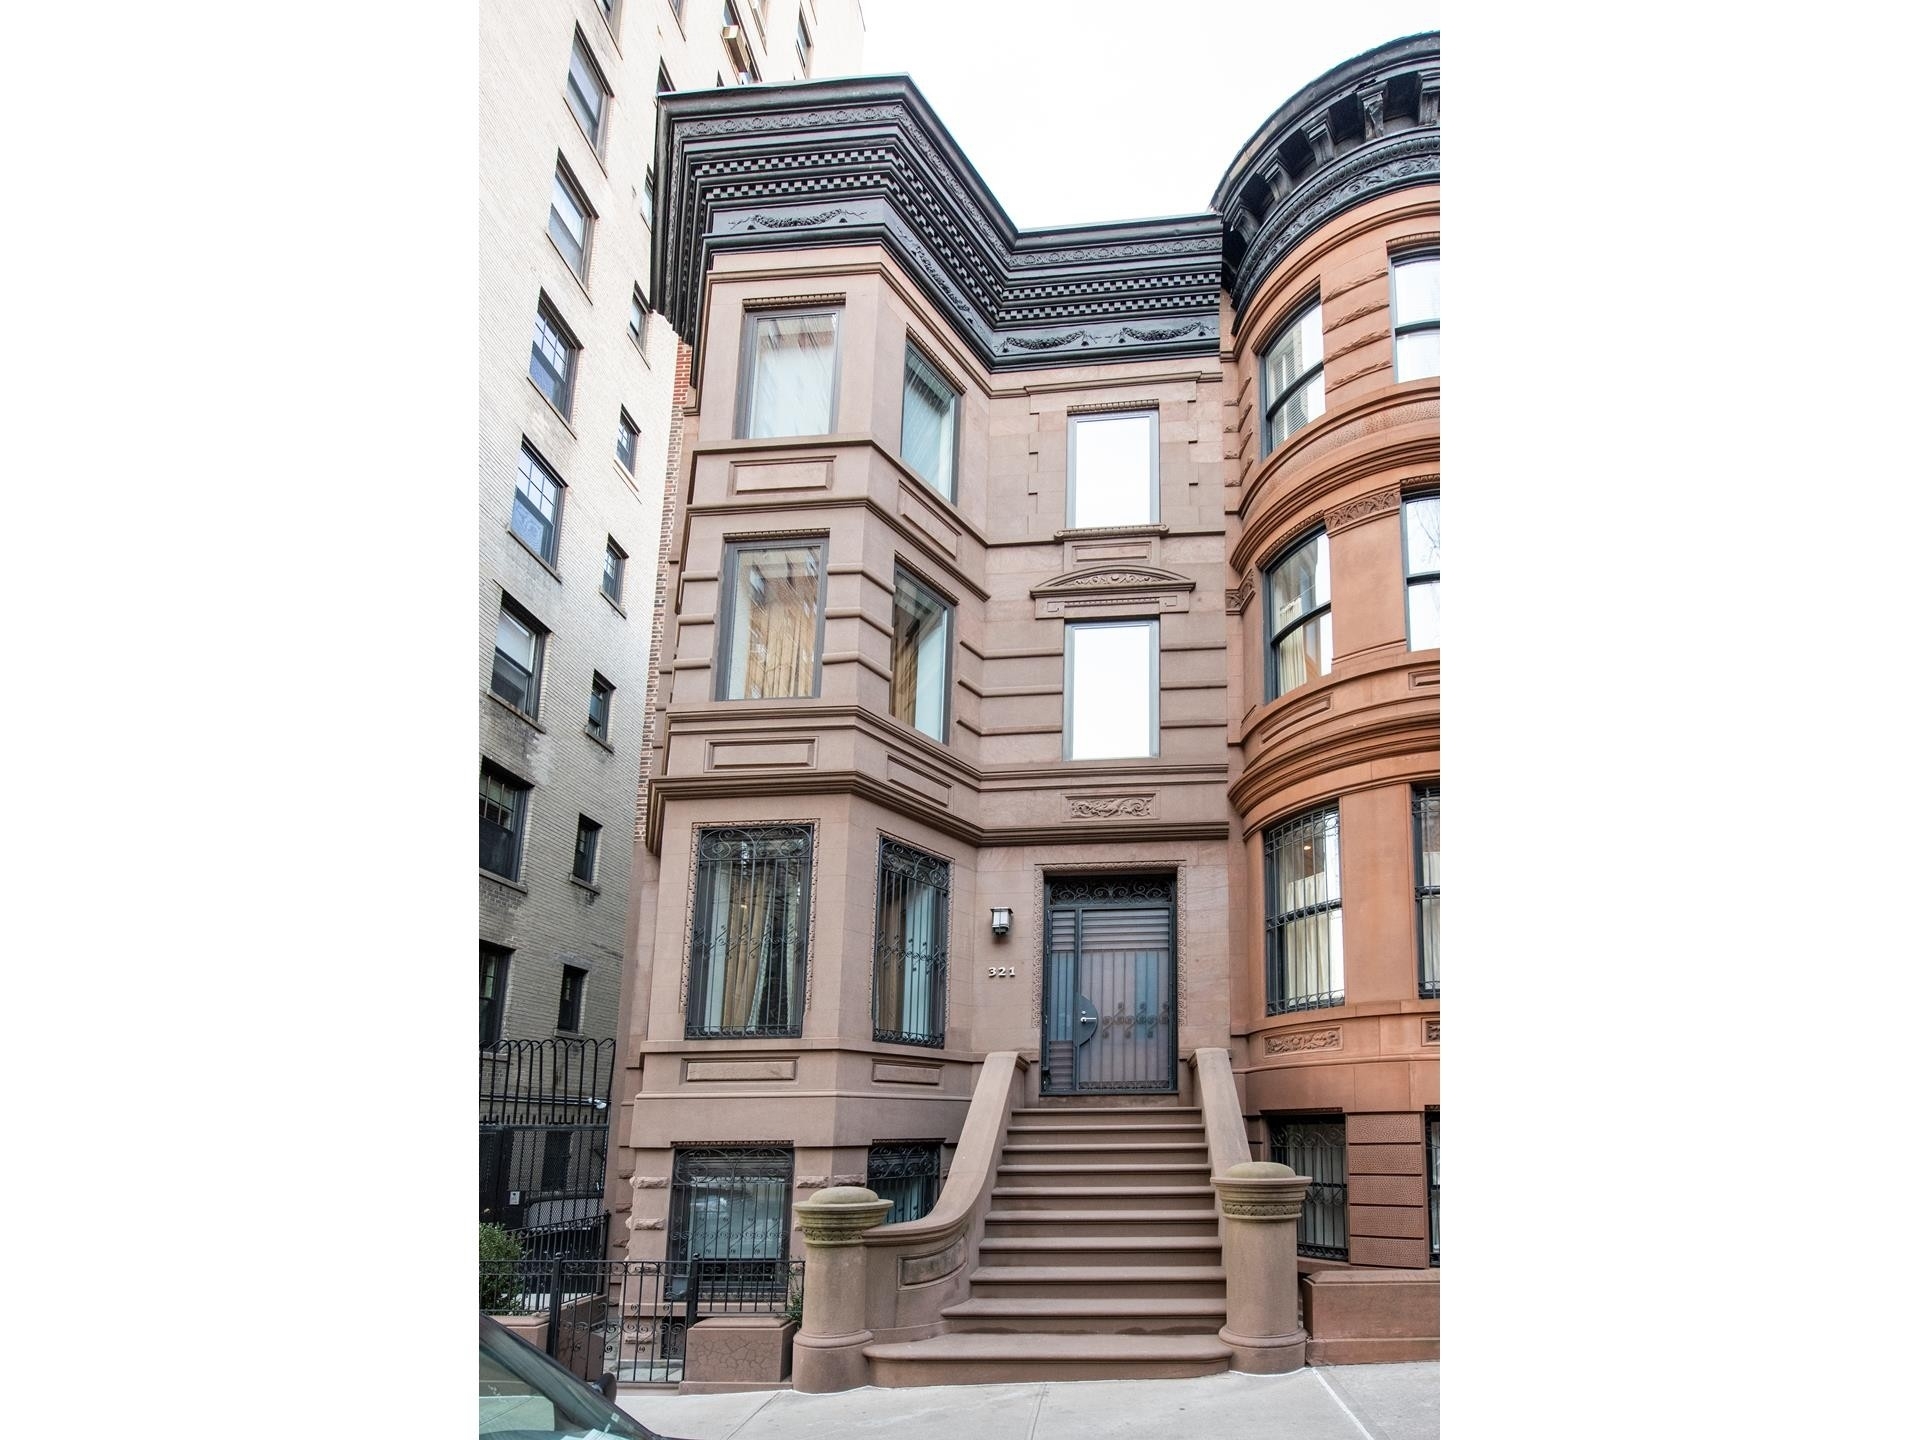 21. Single Family Townhouse for Sale at 321 W 104TH ST, TOWNHOUSE Upper West Side, New York, New York 10025